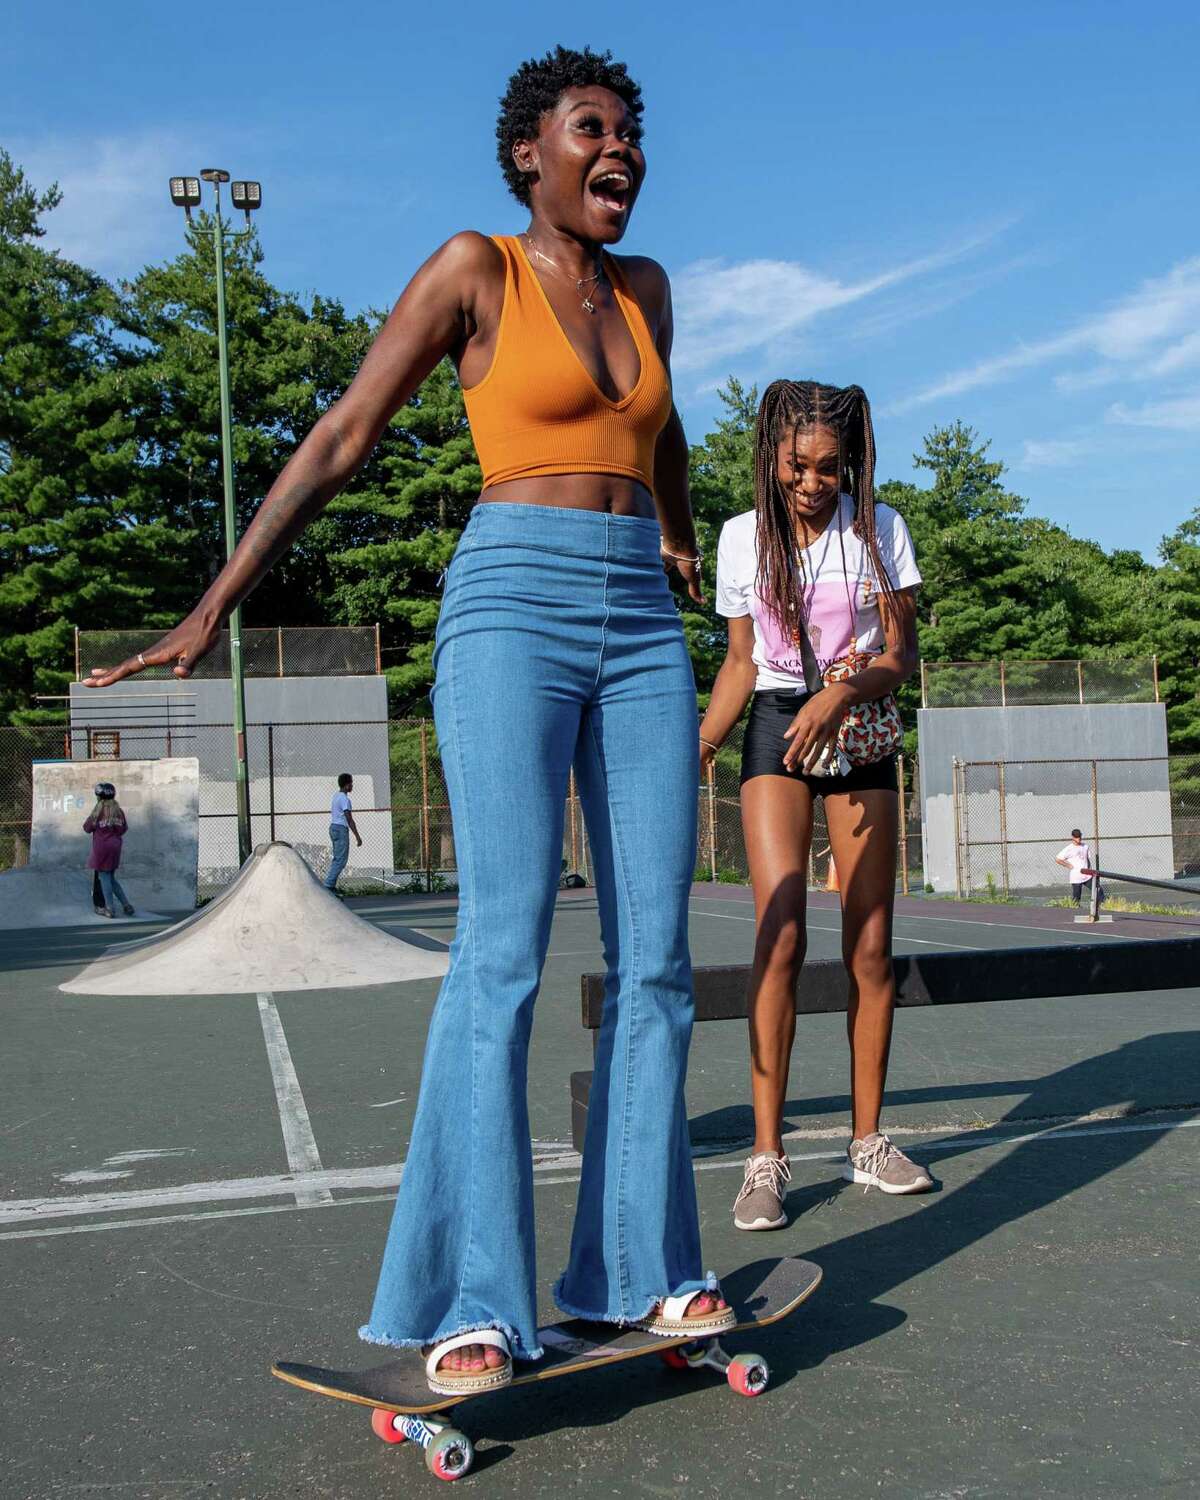 Destiny Harris gets a push from Chantelleigh Graham during a meet-up hosted by Noteworthy Resources to introduce women, youth, members of the LGBTQ+ community and their allies to the sport of skateboarding at the Albany Skate Park in Washington Park in Albany, NY, on Saturday, Aug. 15, 2020 (Jim Franco/special to the Times Union.)